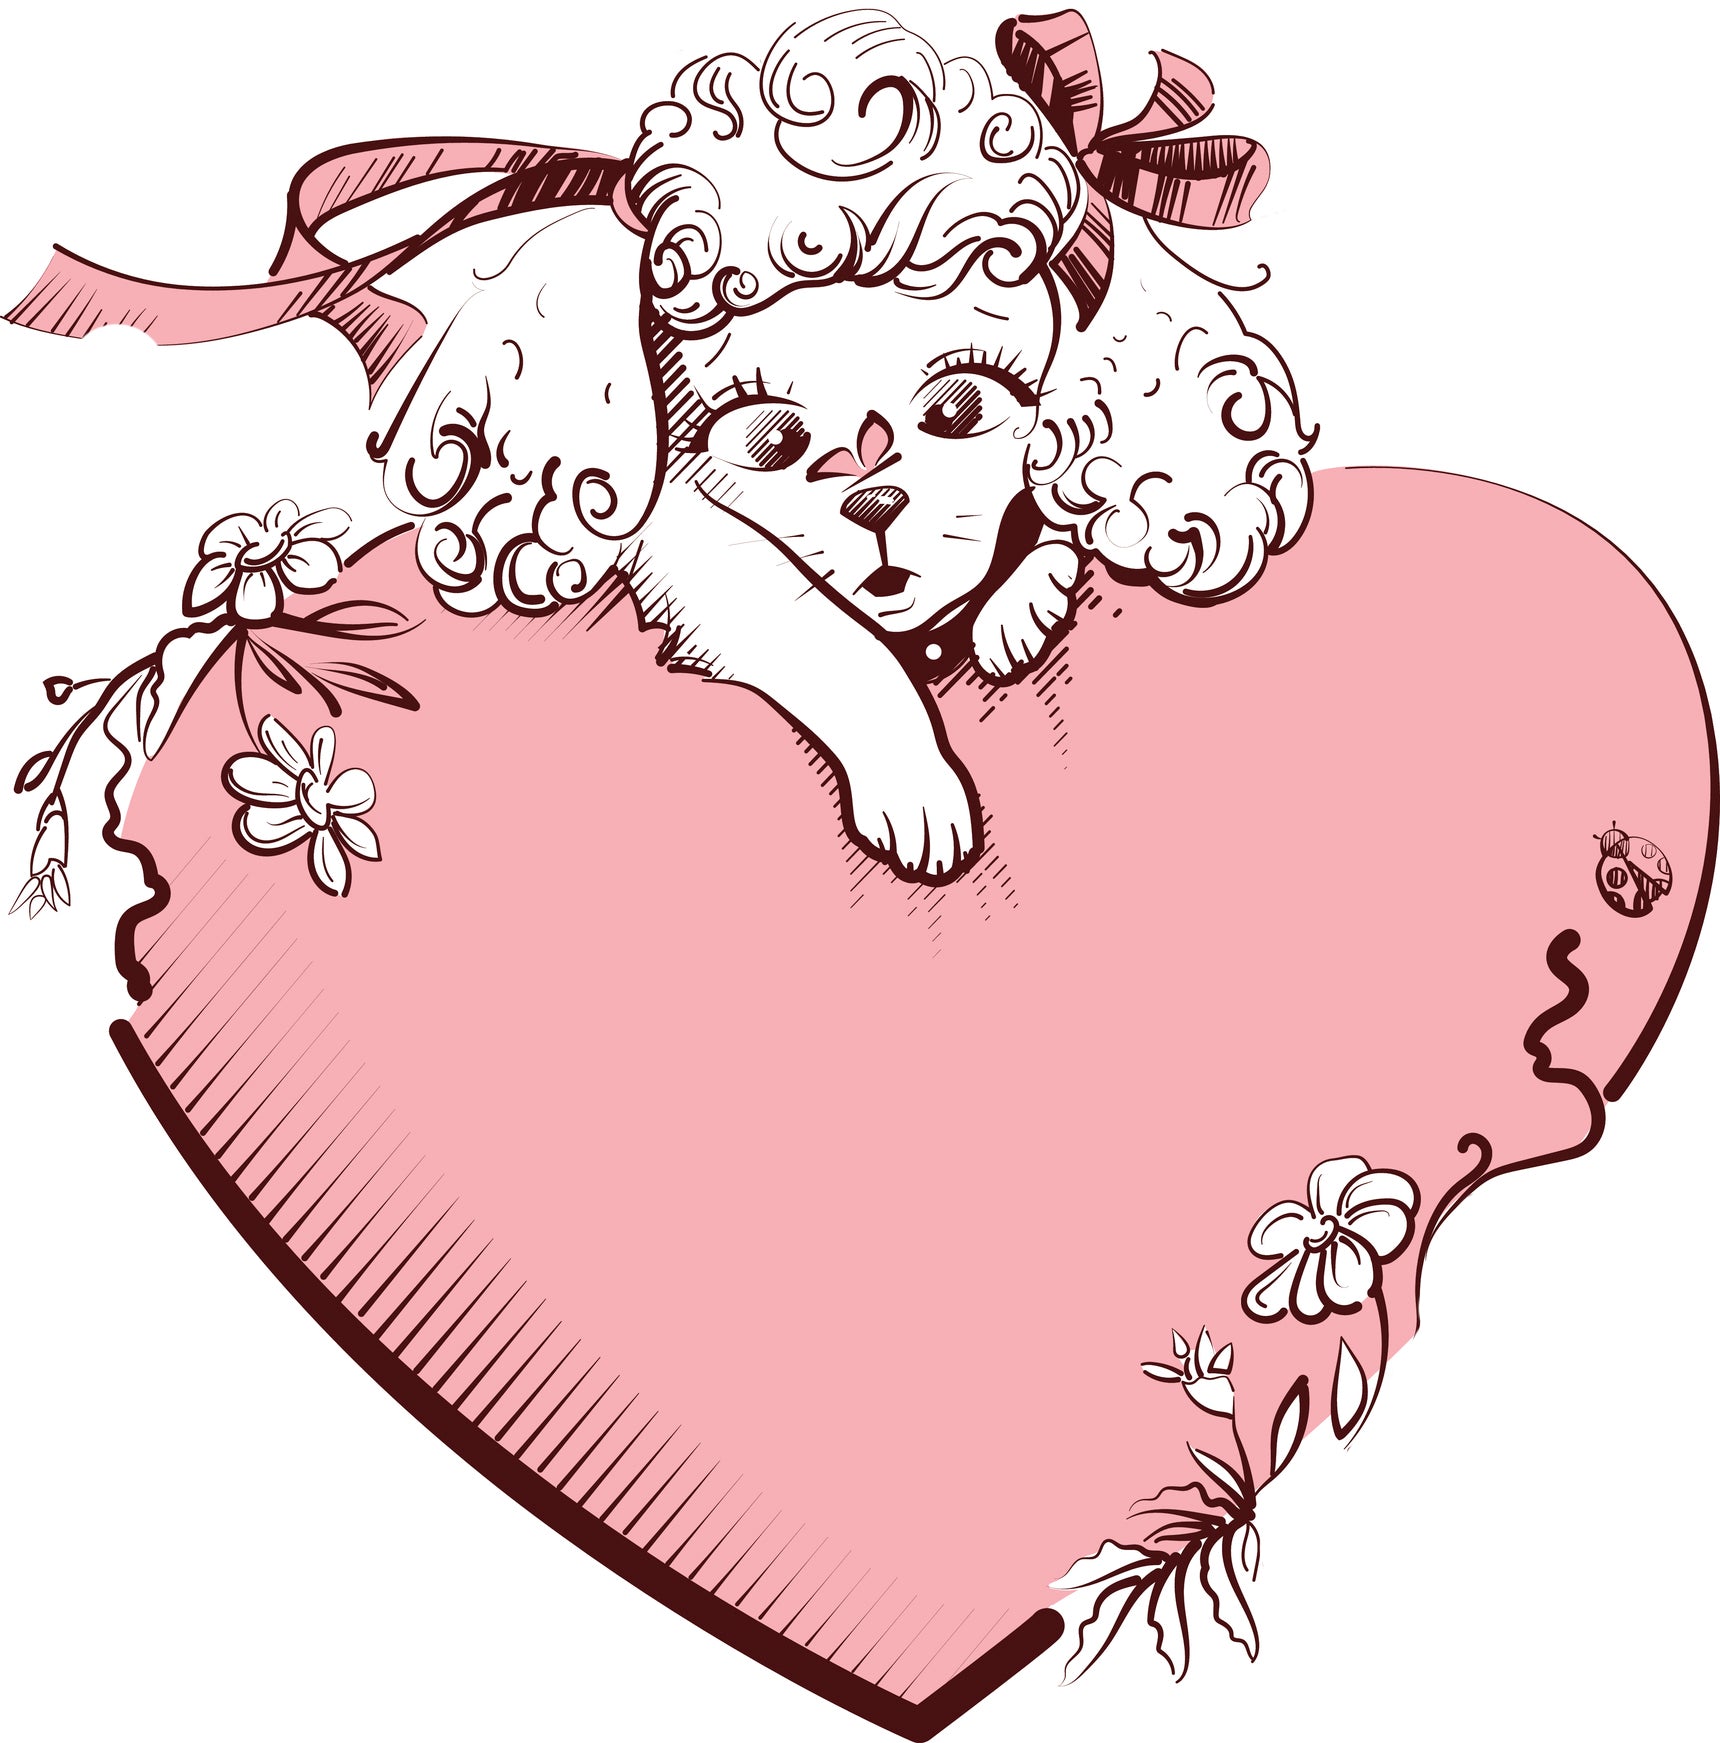 Pretty Girly Poodle Puppy Dog Pink Heart Cartoon Icon Vinyl Decal Sticker